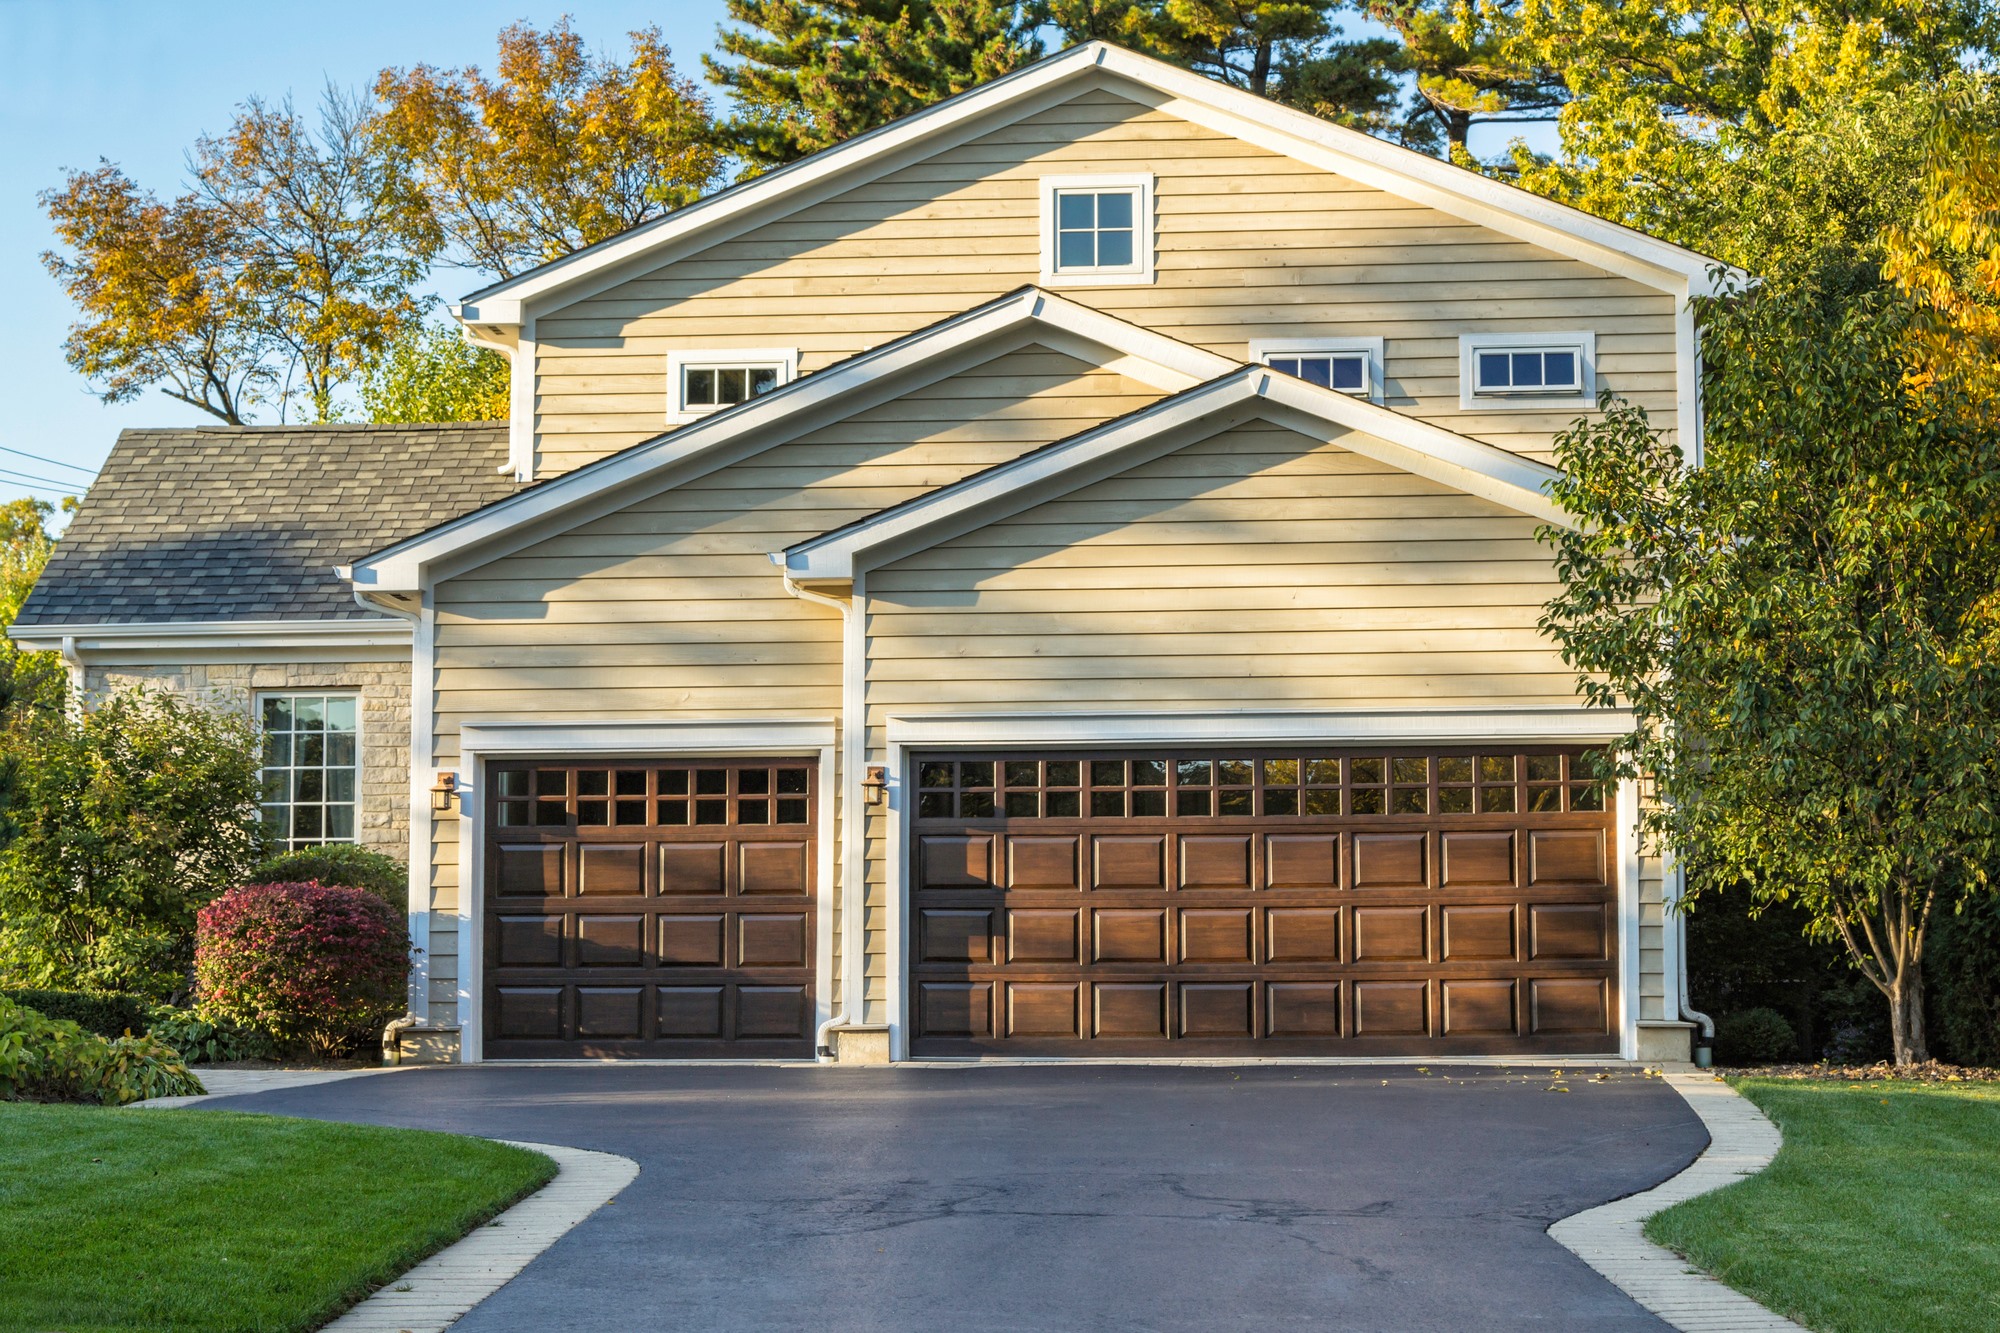 What Are the Different Types of Garage Doors? Pt. 2